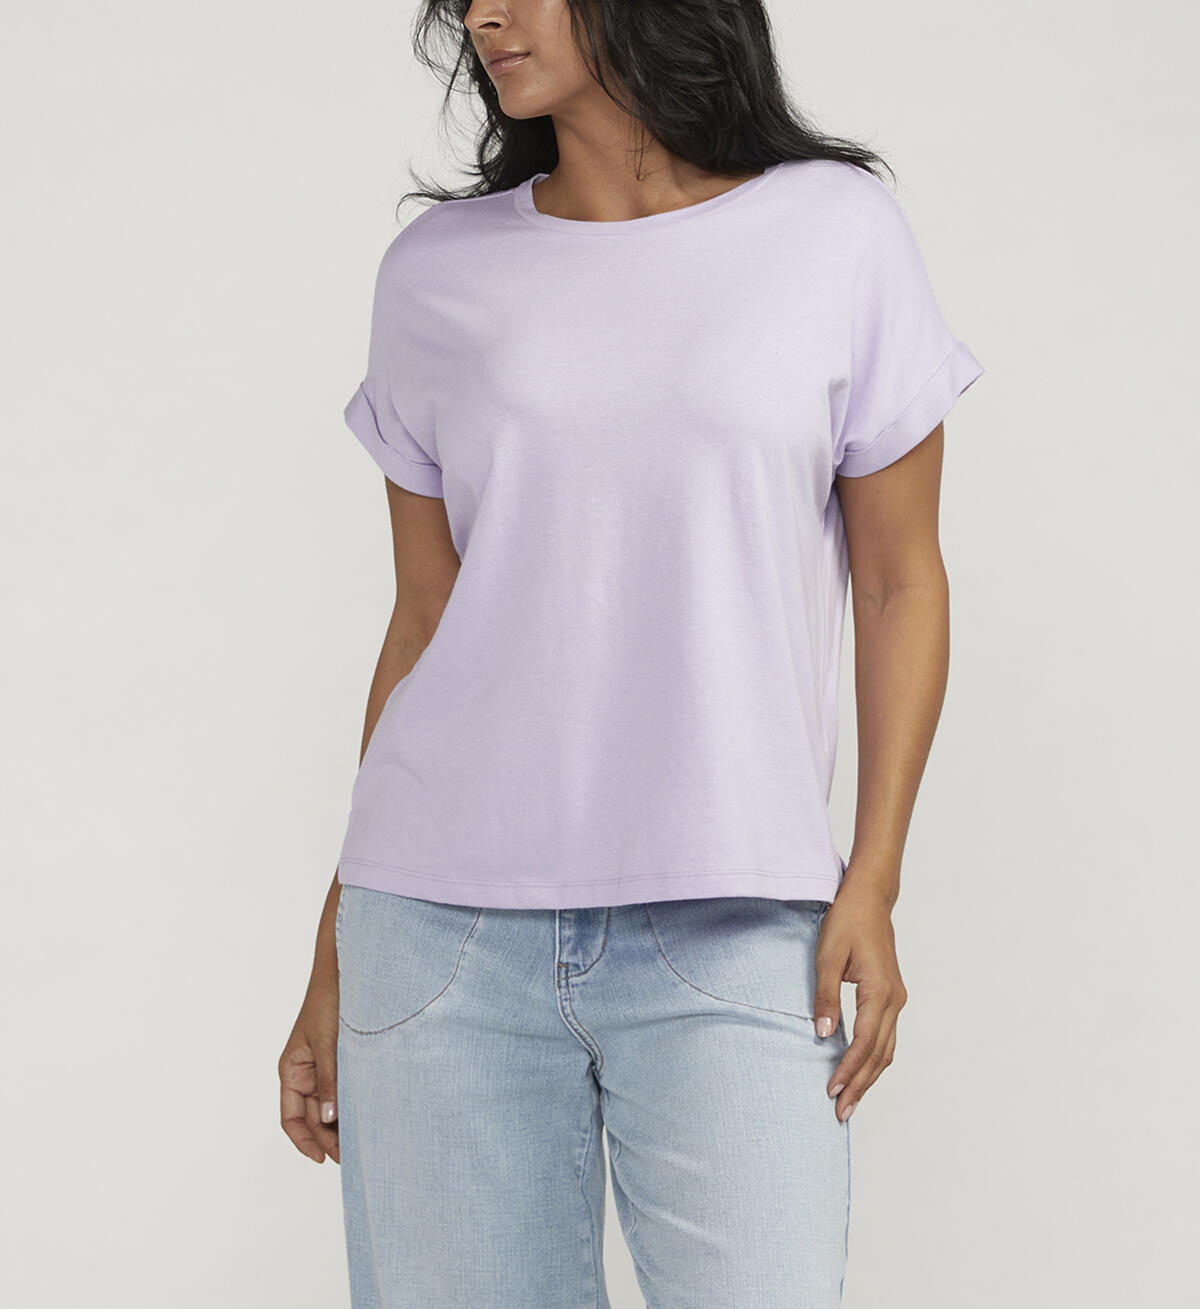 Drapey Luxe Tee, Lavender, hi-res image number 0